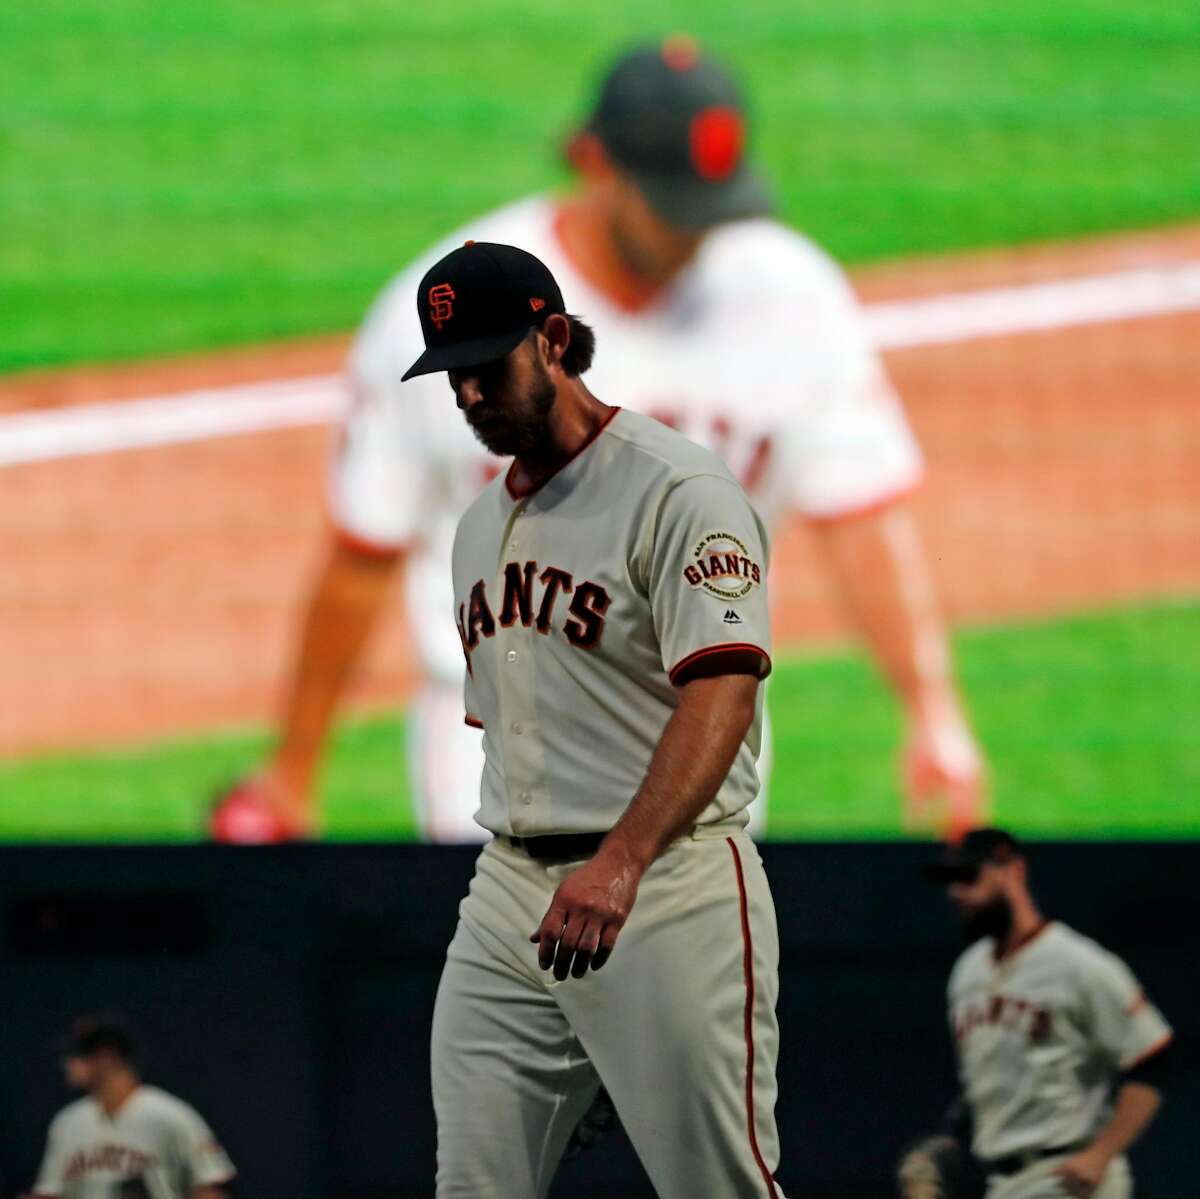 San Francisco Giants' Madison Bumgarner returns to the dugout after retiring the New York Mets' in 6th inning during MLB game at Oracle Park in San Francisco, Calif., on Thursday, July 18, 2019.